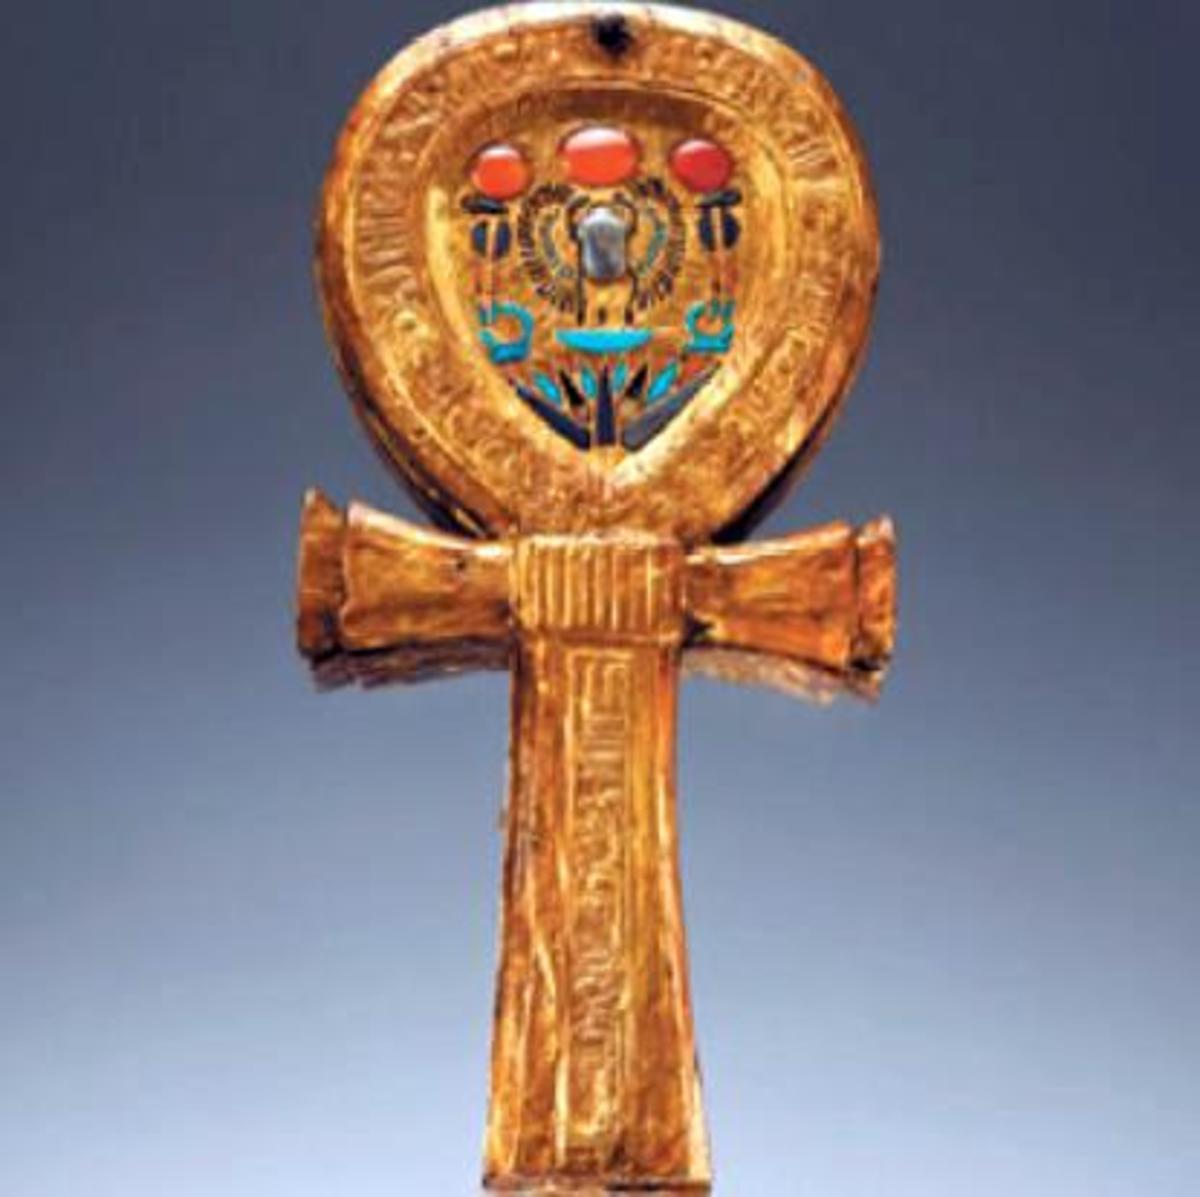 The Ankh - Symbol of Life and Good Health in Ancient Egypt Has Survived in Modern Languages